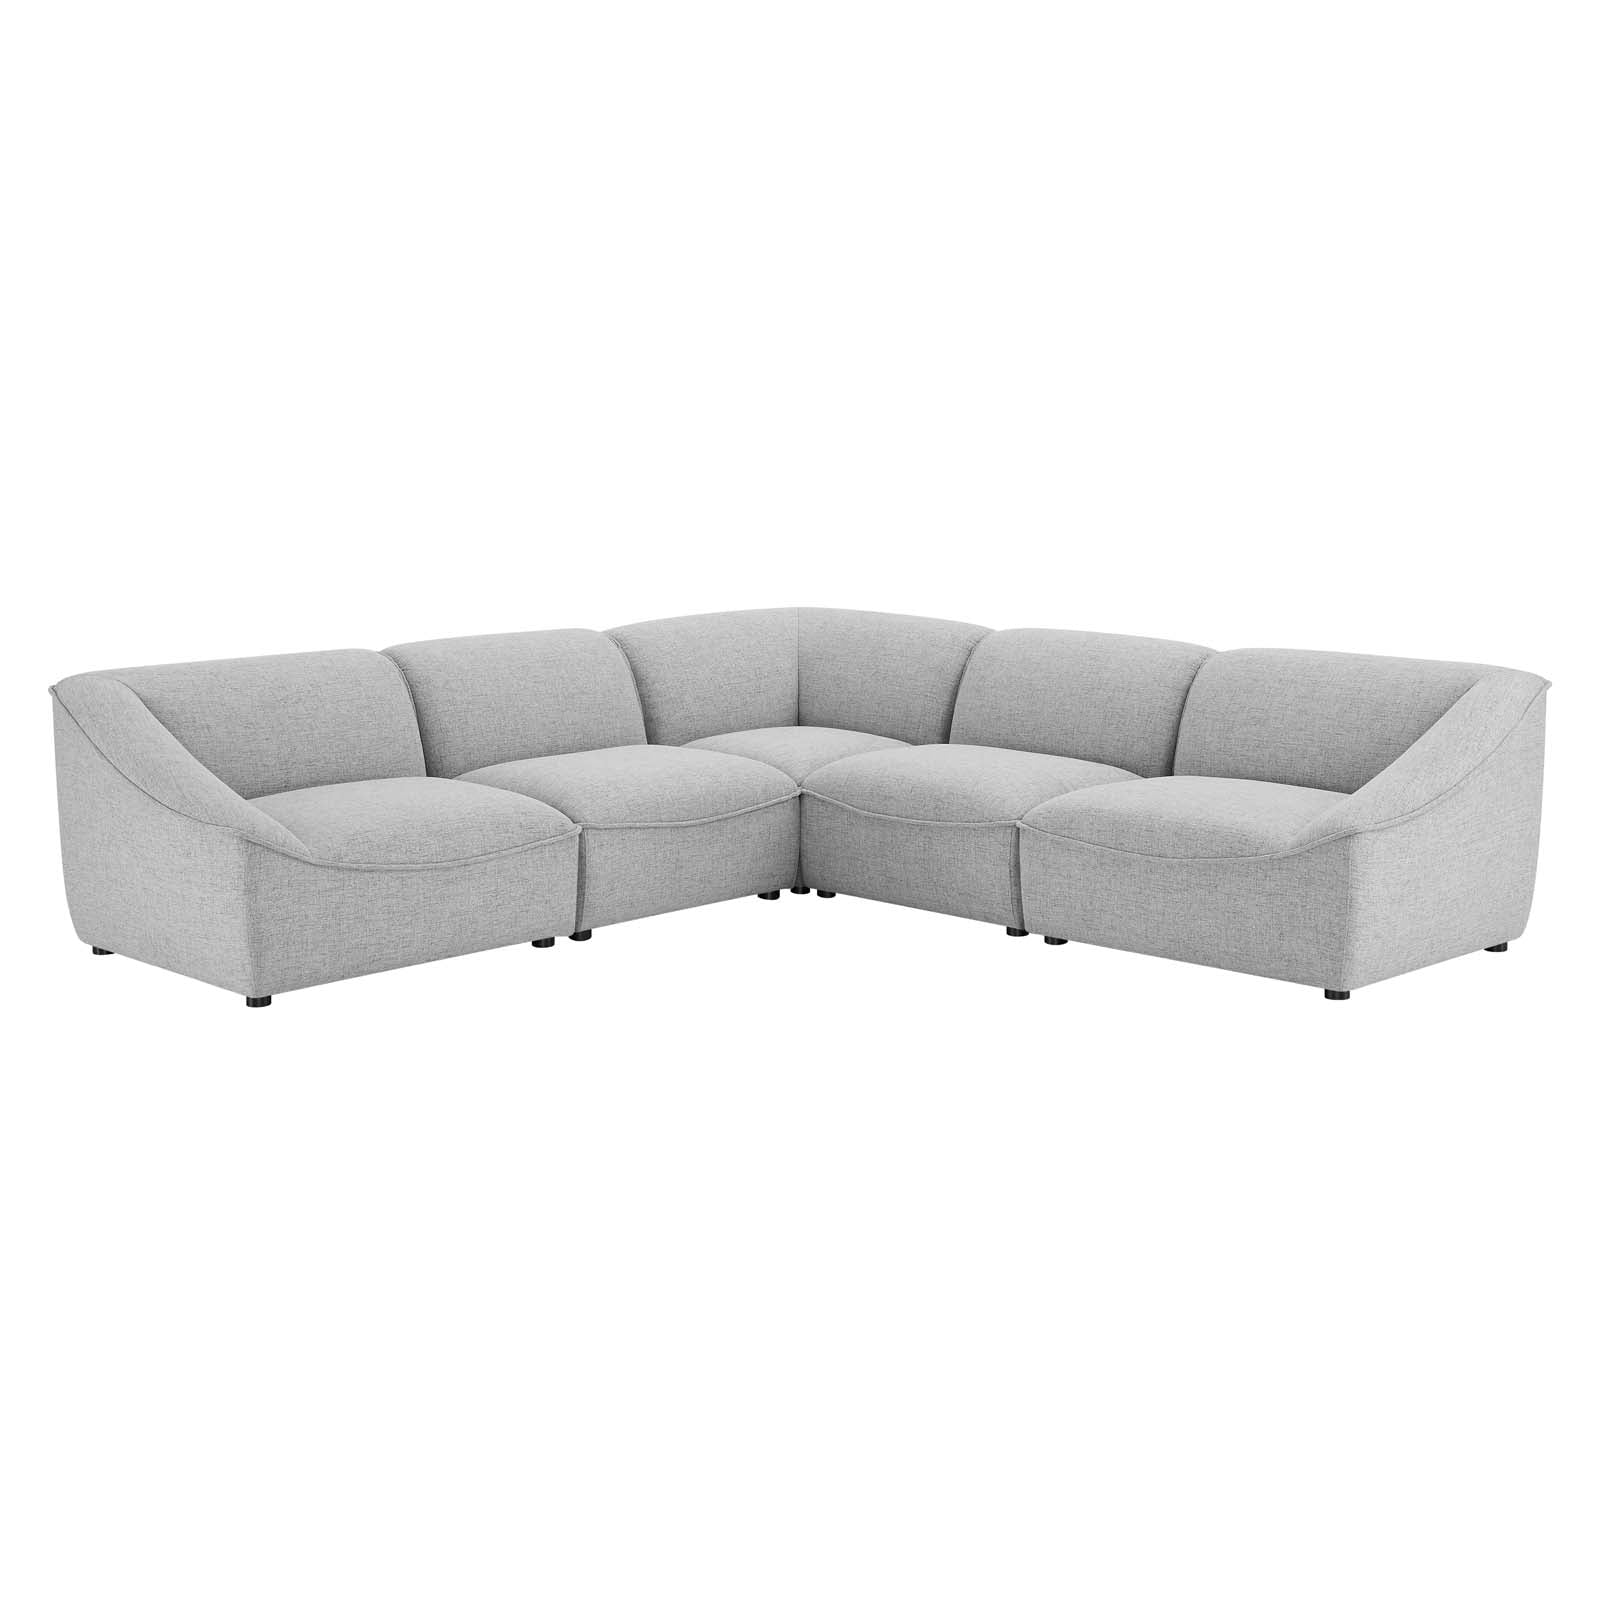 Modway Sectional Sofas - Comprise-5-Piece-Sectional-Sofa-Light-Gray